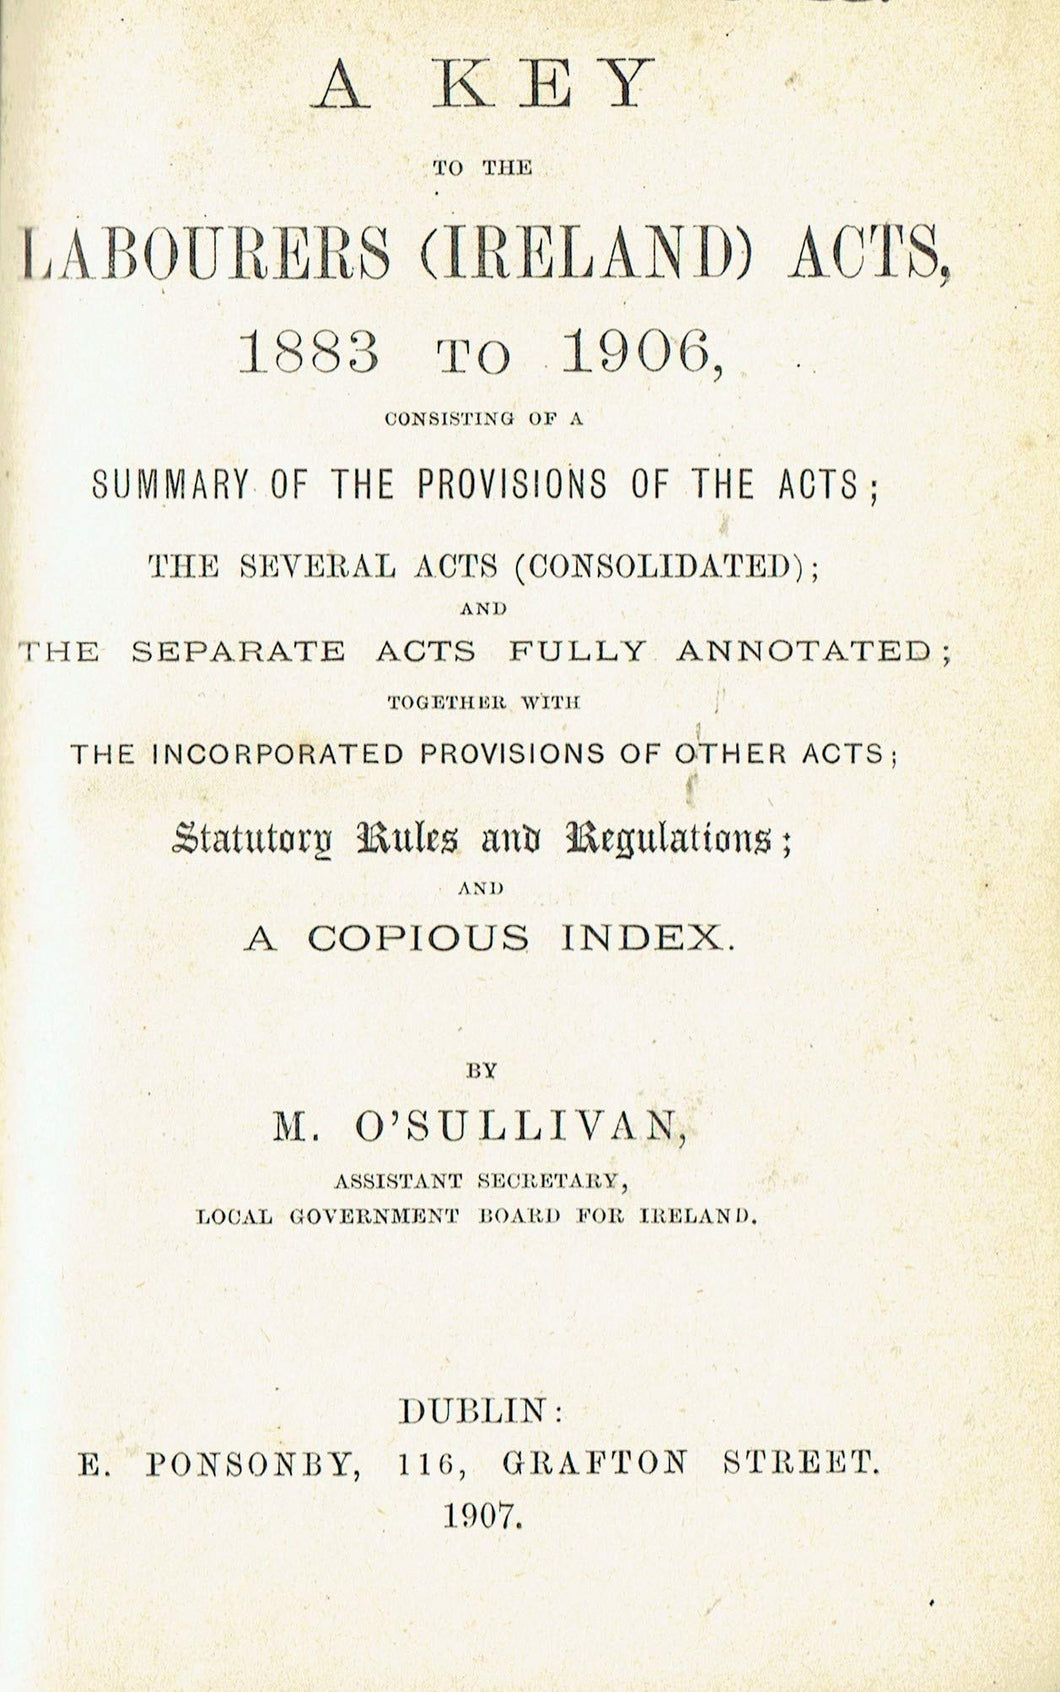 A key to the Labourers (Ireland) Acts, 1883 to 1906: Consisting of a summary of the provisions of the acts